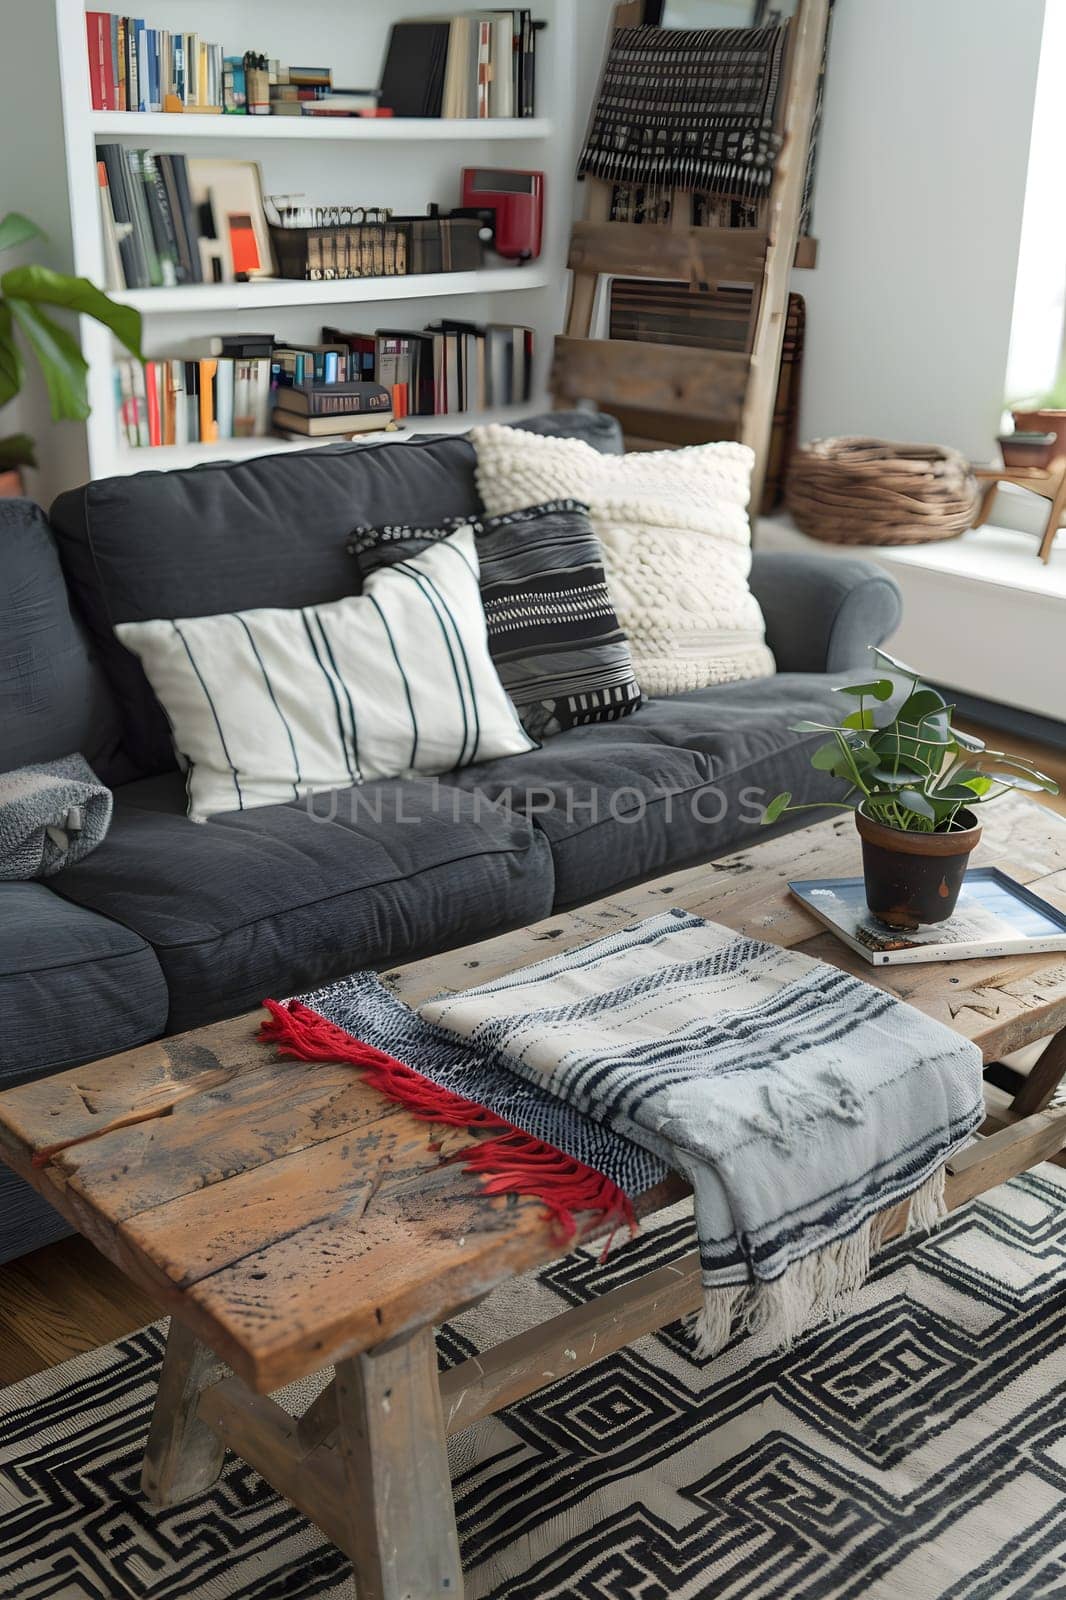 The living room is furnished with a wooden couch and a rectangular coffee table. A plant adds a touch of green to the interior design of the room